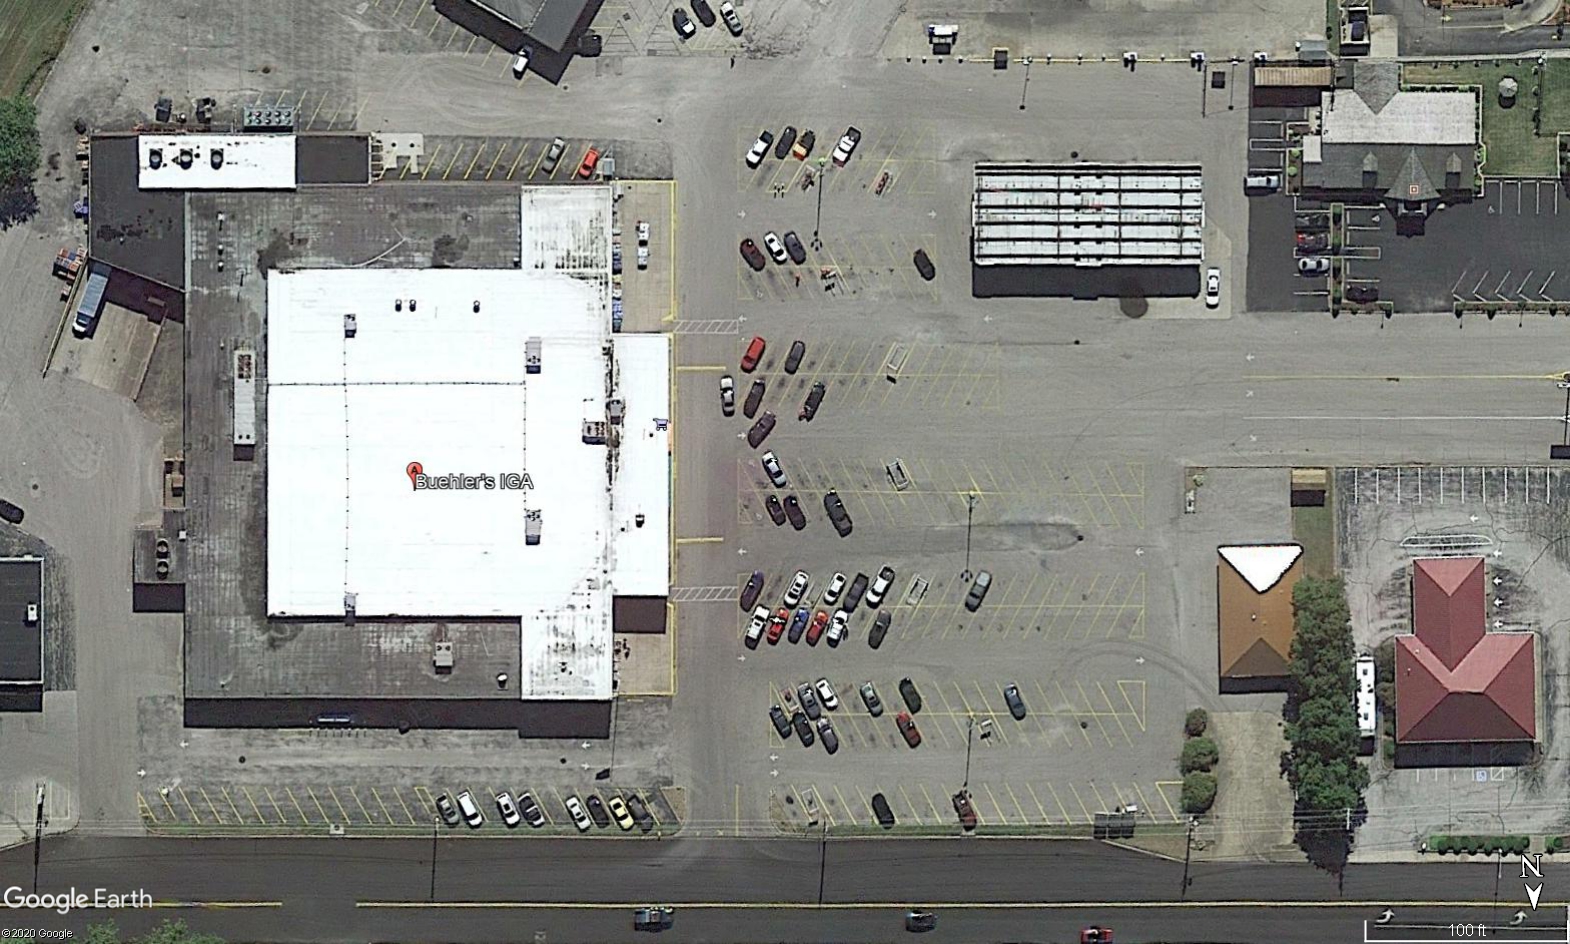 Parking Lot, image from Google Earth